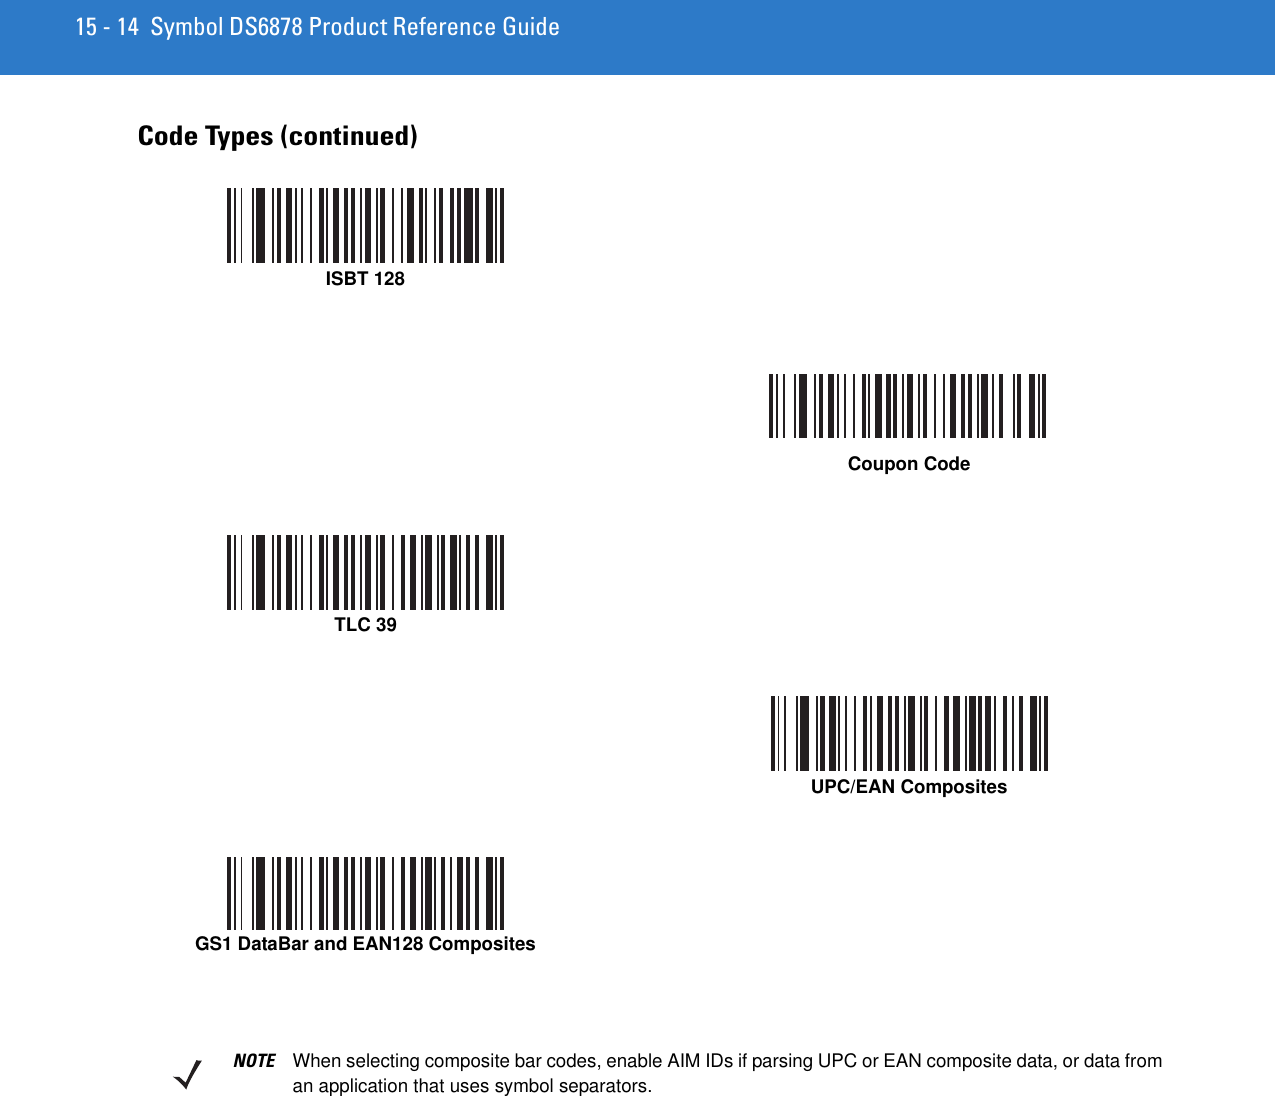 15 - 14 Symbol DS6878 Product Reference GuideCode Types (continued)ISBT 128Coupon CodeTLC 39UPC/EAN CompositesGS1 DataBar and EAN128 CompositesNOTE When selecting composite bar codes, enable AIM IDs if parsing UPC or EAN composite data, or data from an application that uses symbol separators.